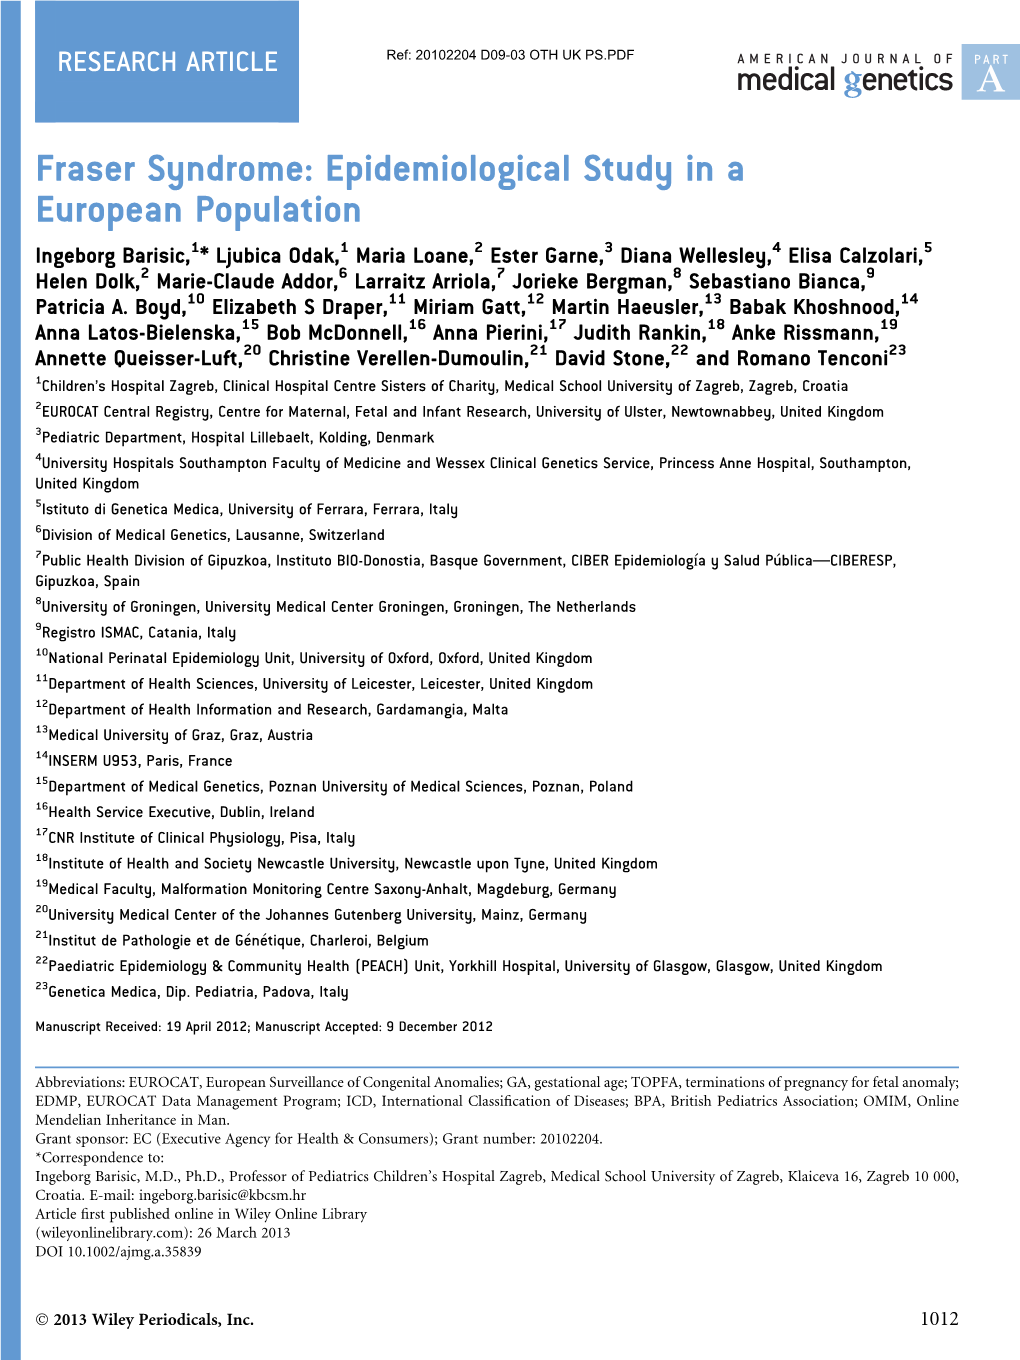 Fraser Syndrome: Epidemiological Study in a European Population